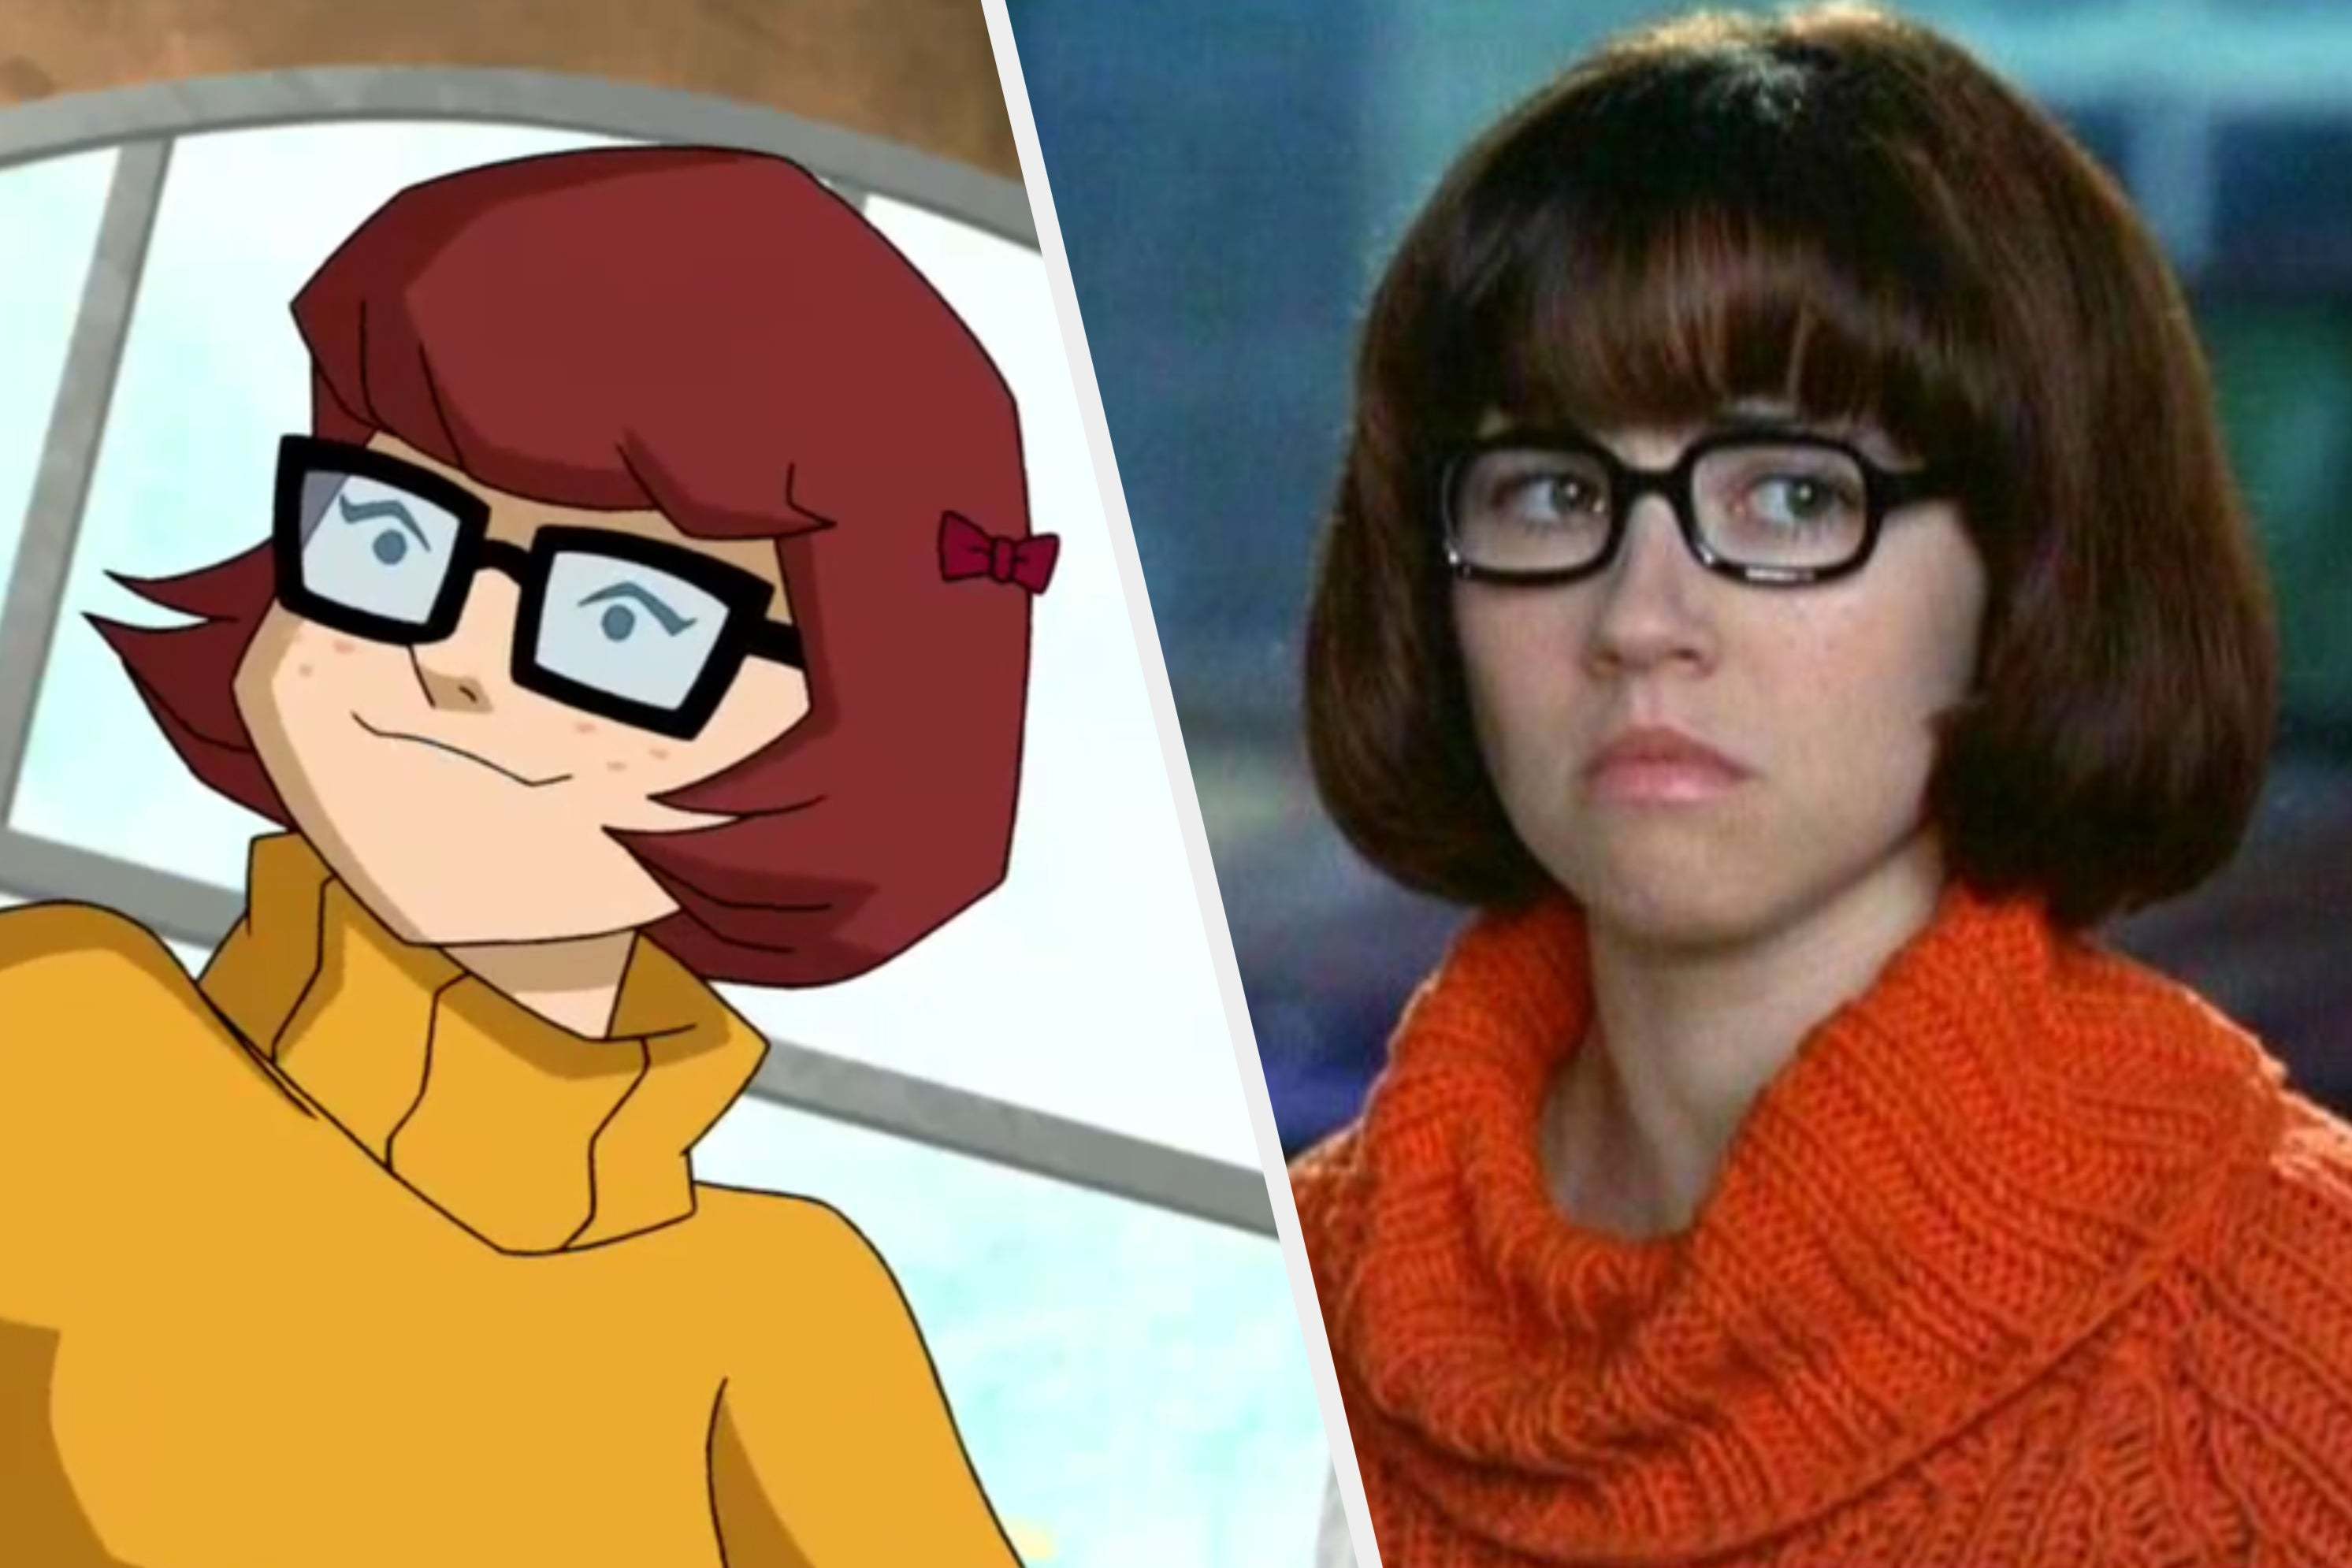 ali pereira recommends velma and shaggy kissing pic